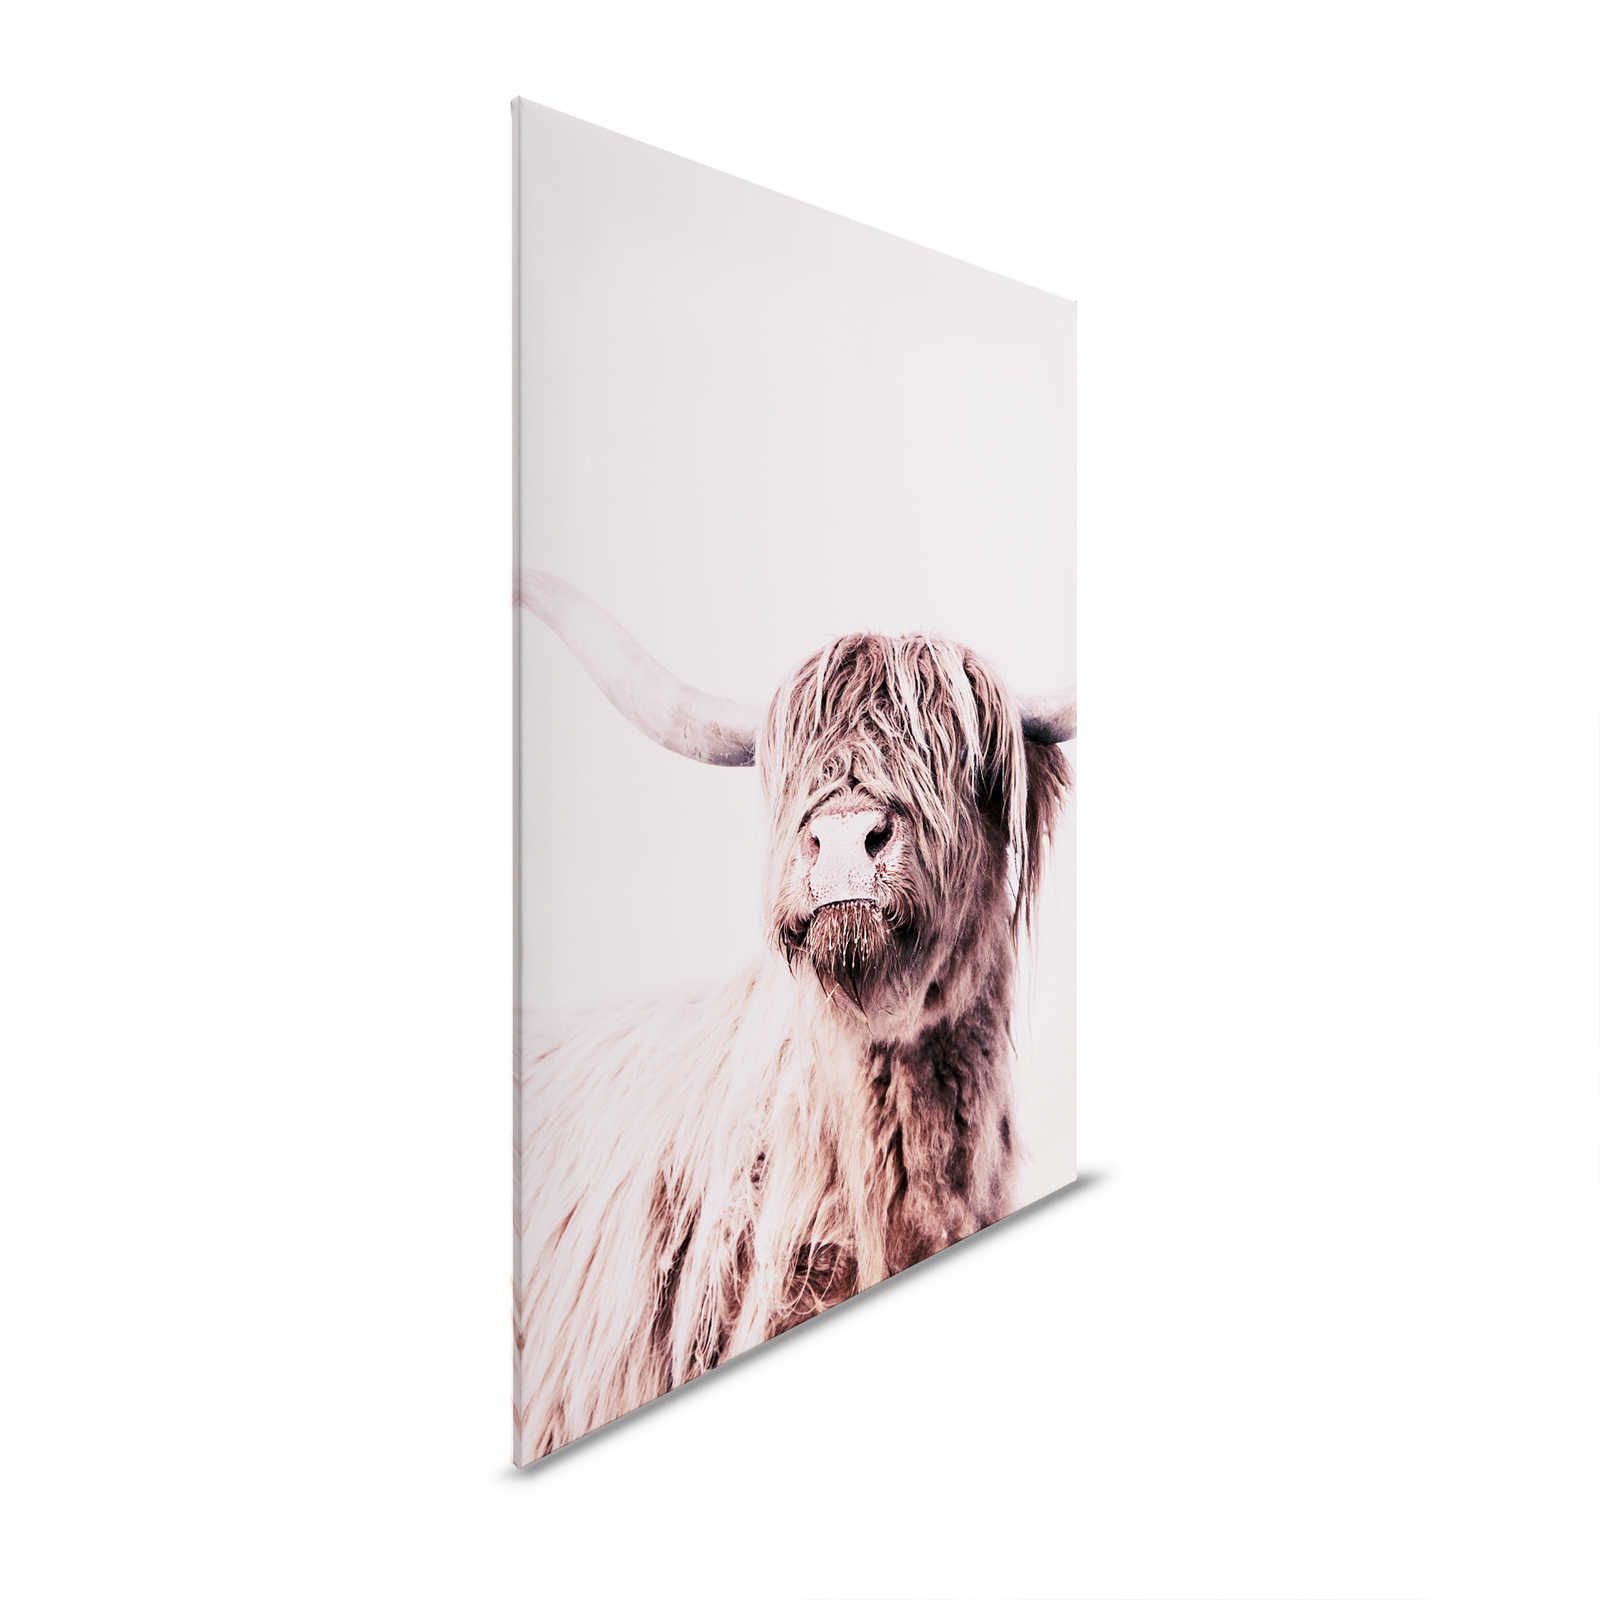 Canvas painting Highland Cattle Portrait in Sepia Style - 0,90 m x 0,60 m
